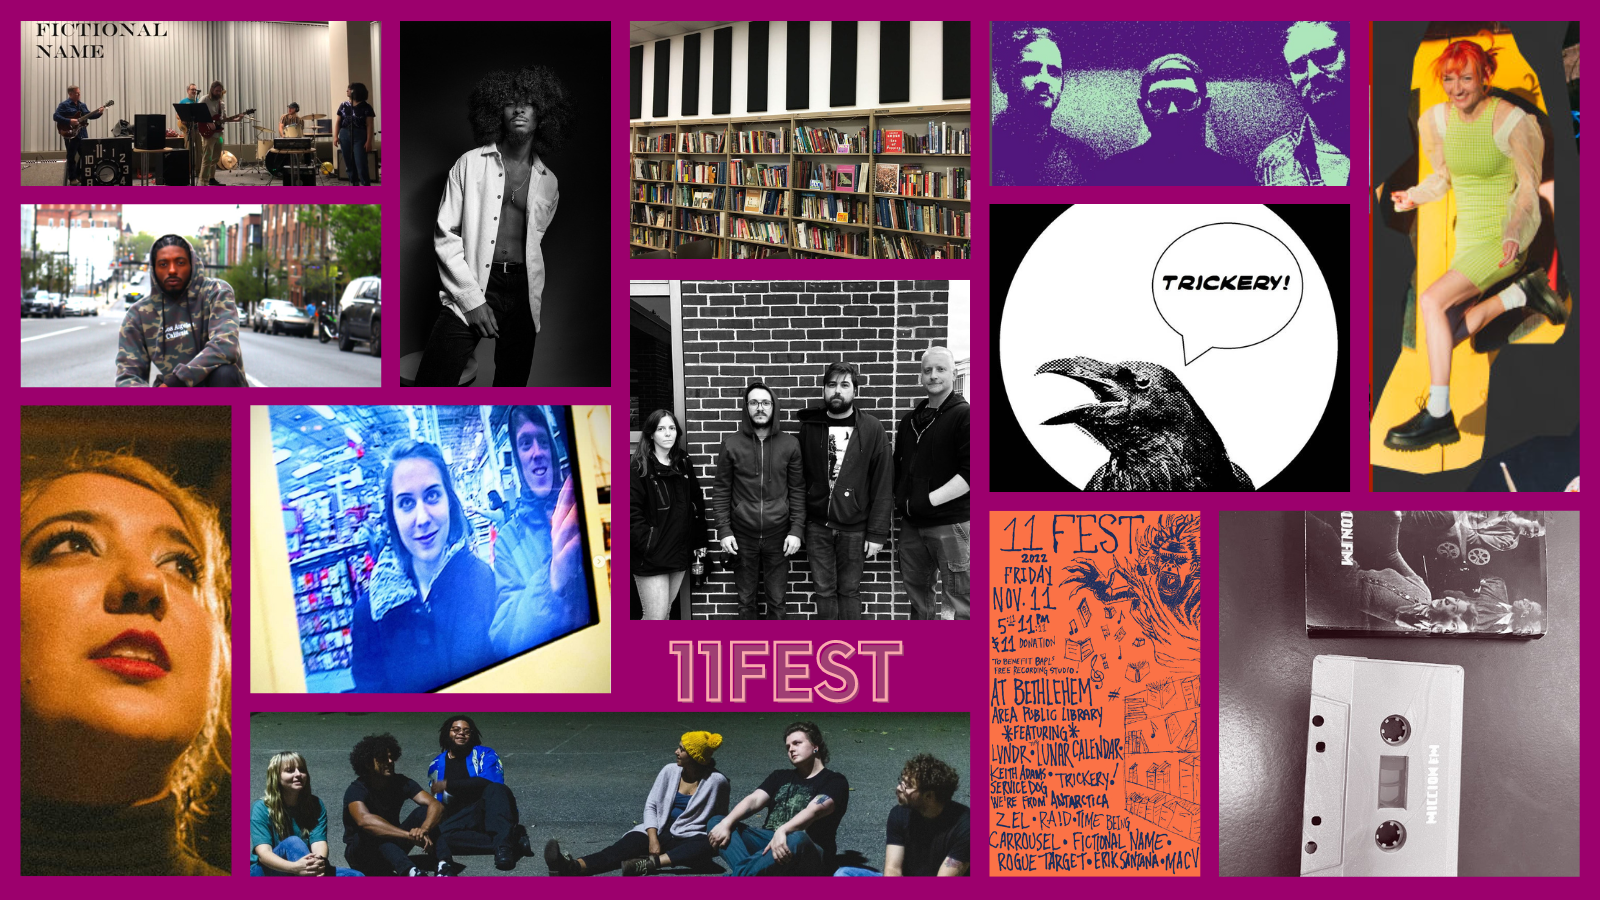 11fest collage showing all the artists